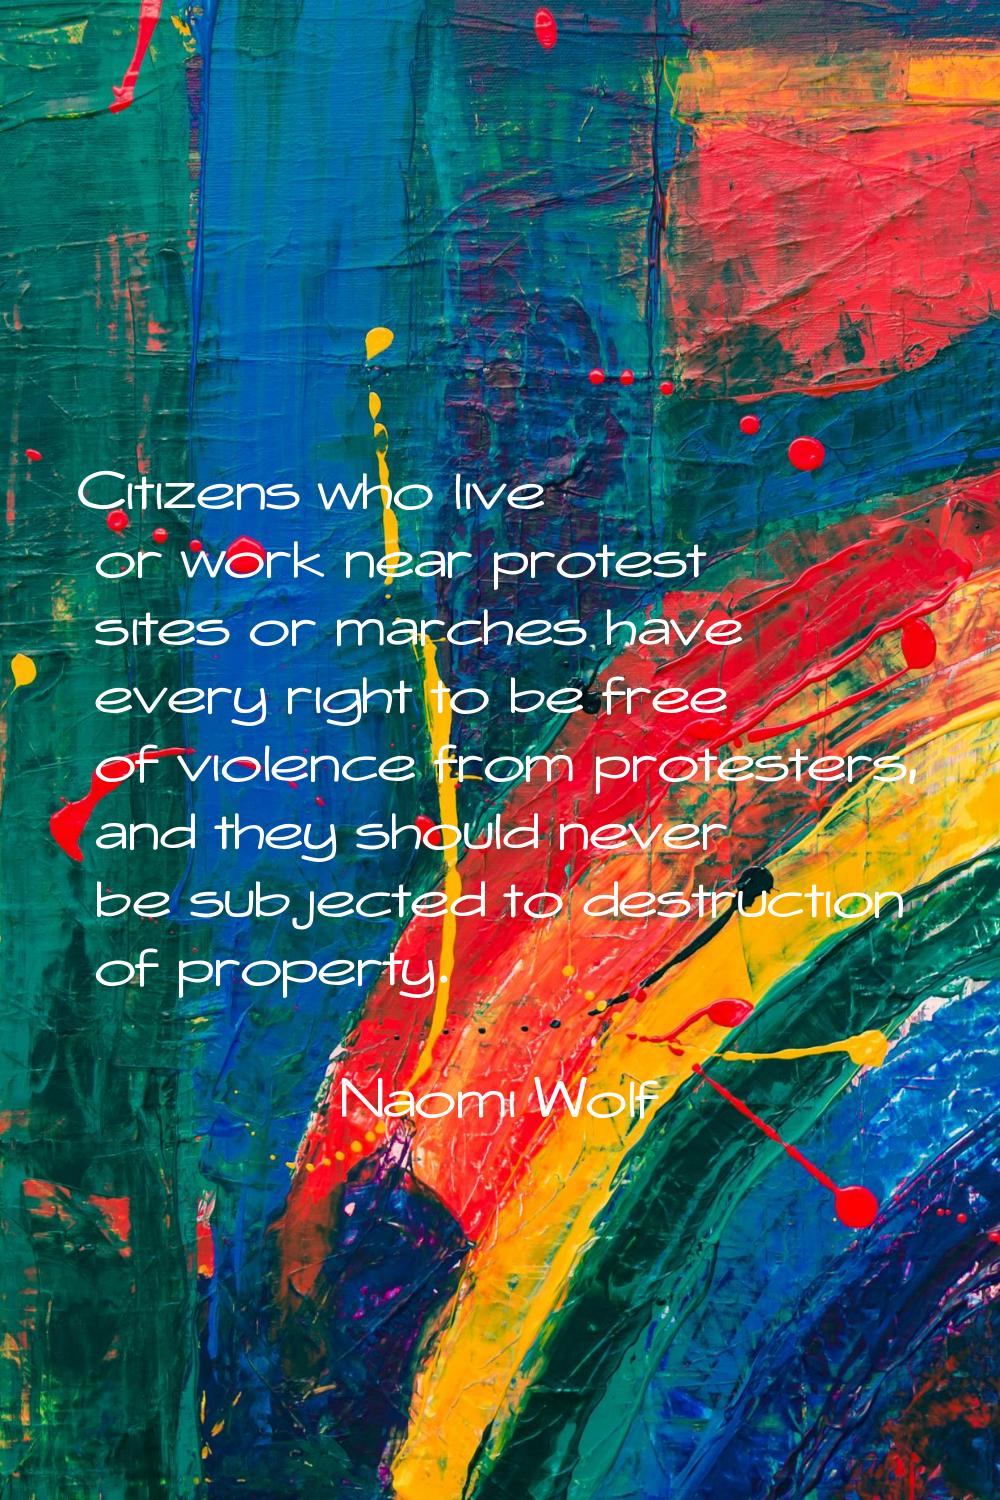 Citizens who live or work near protest sites or marches have every right to be free of violence fro